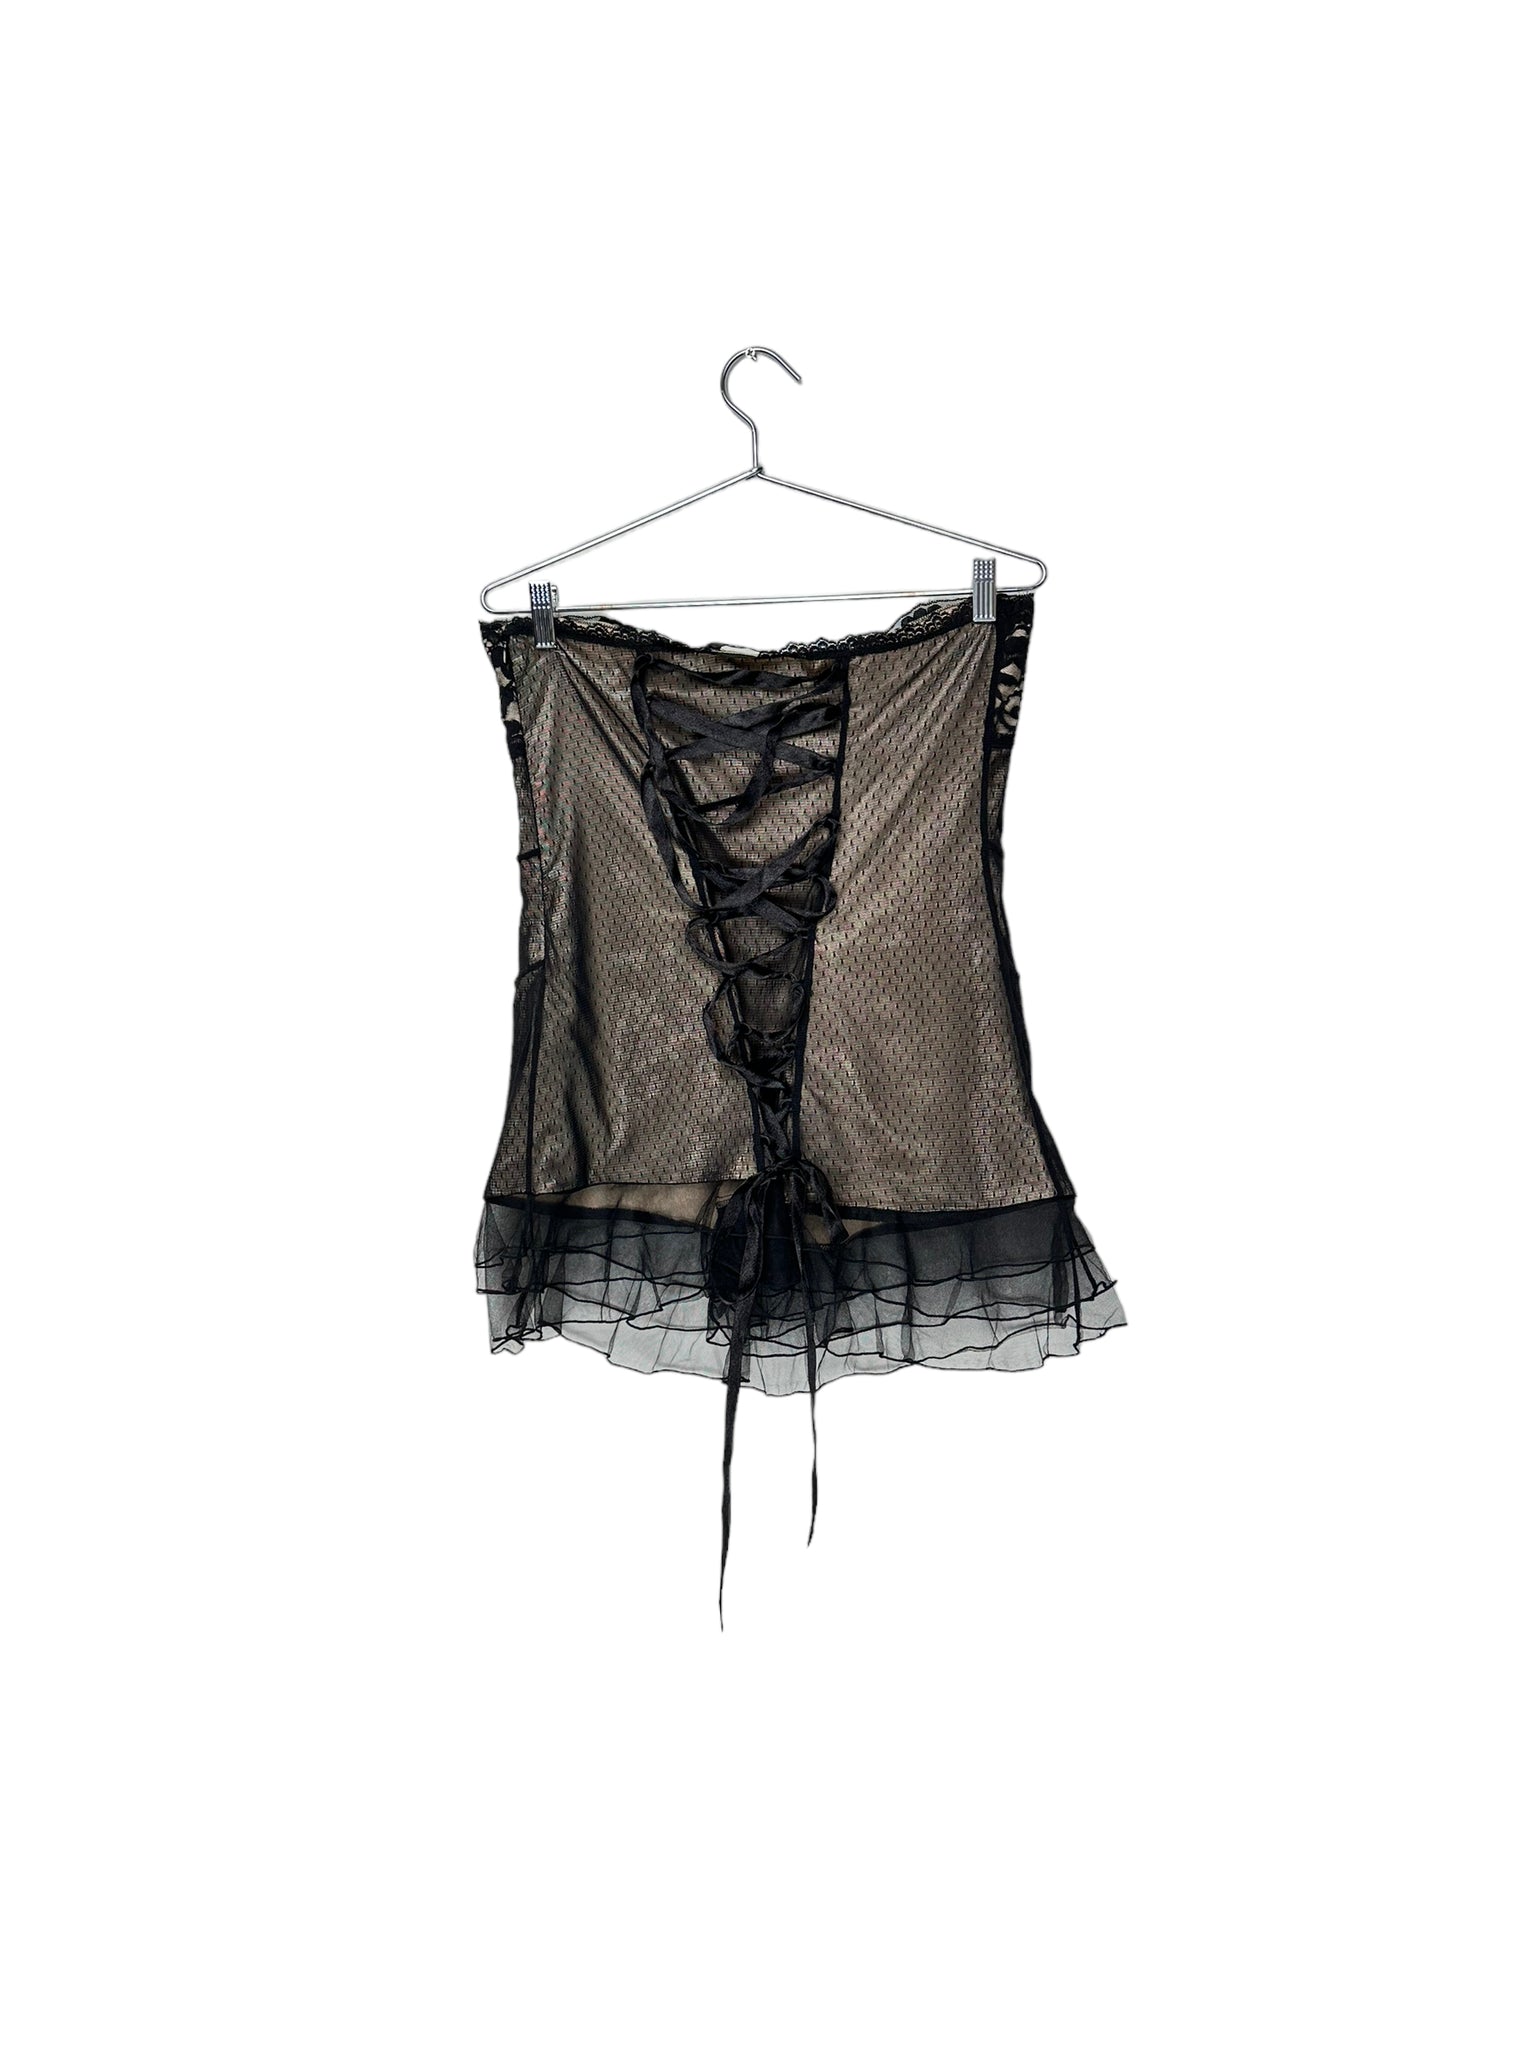 Black Lace Corseted Top